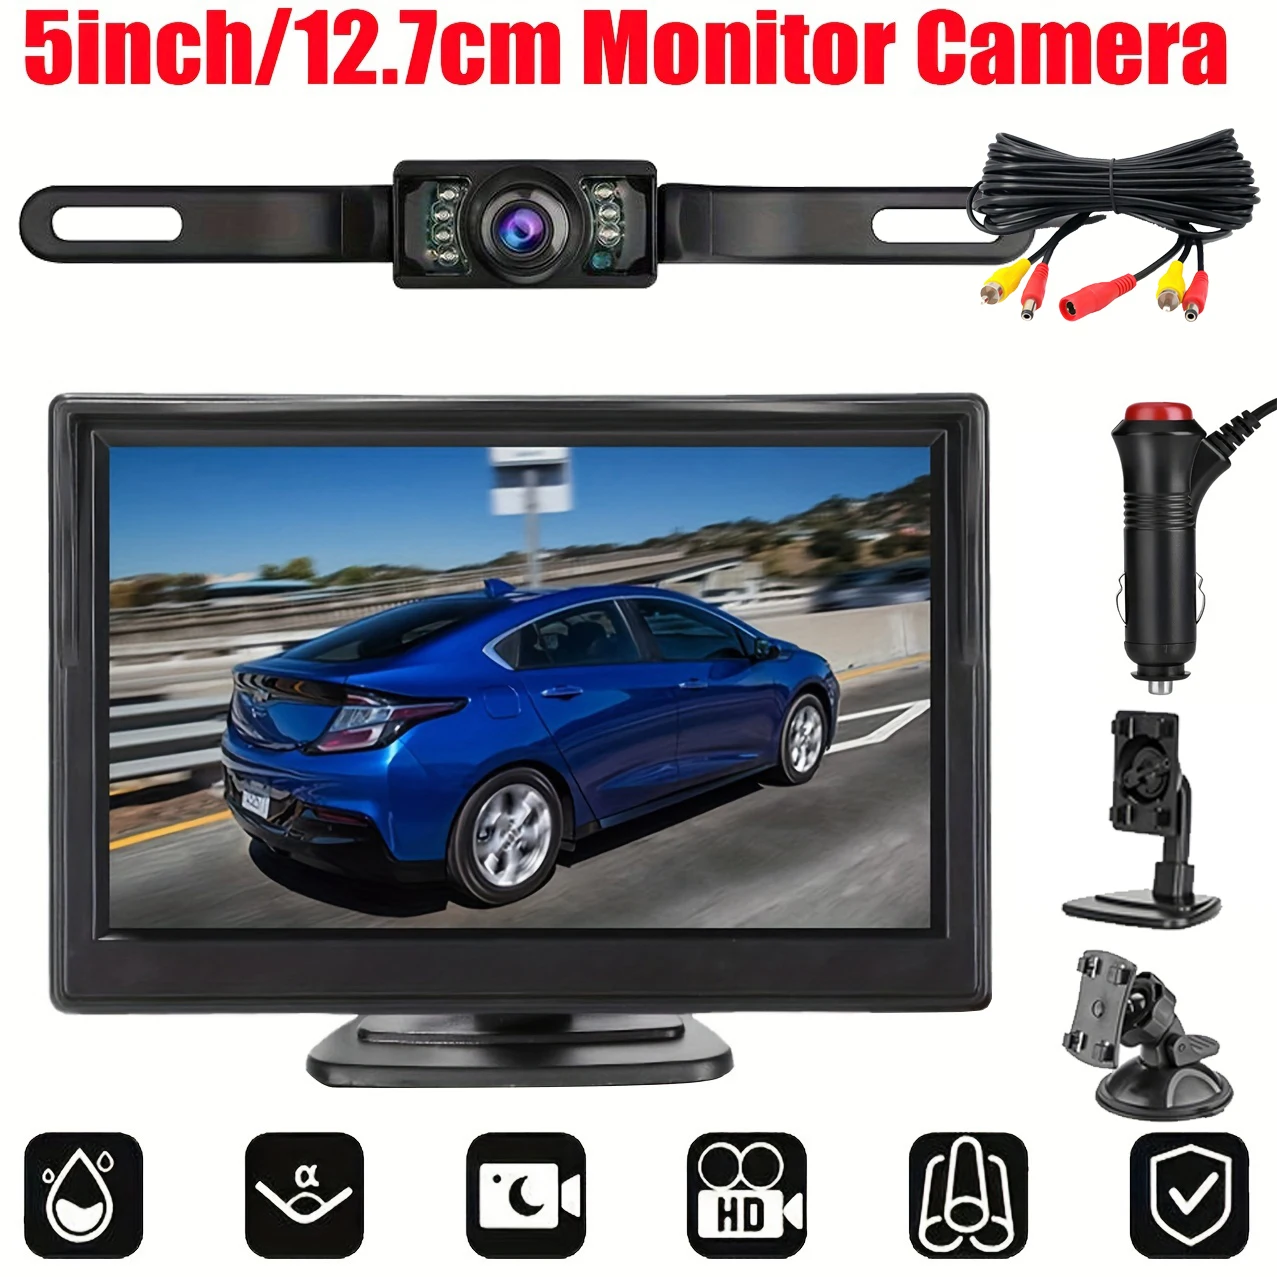 

5 inch TFT LCD Car HD Monitor Reverse Camera Security Display for Reverse Backup Parking Camera Drive Recorder